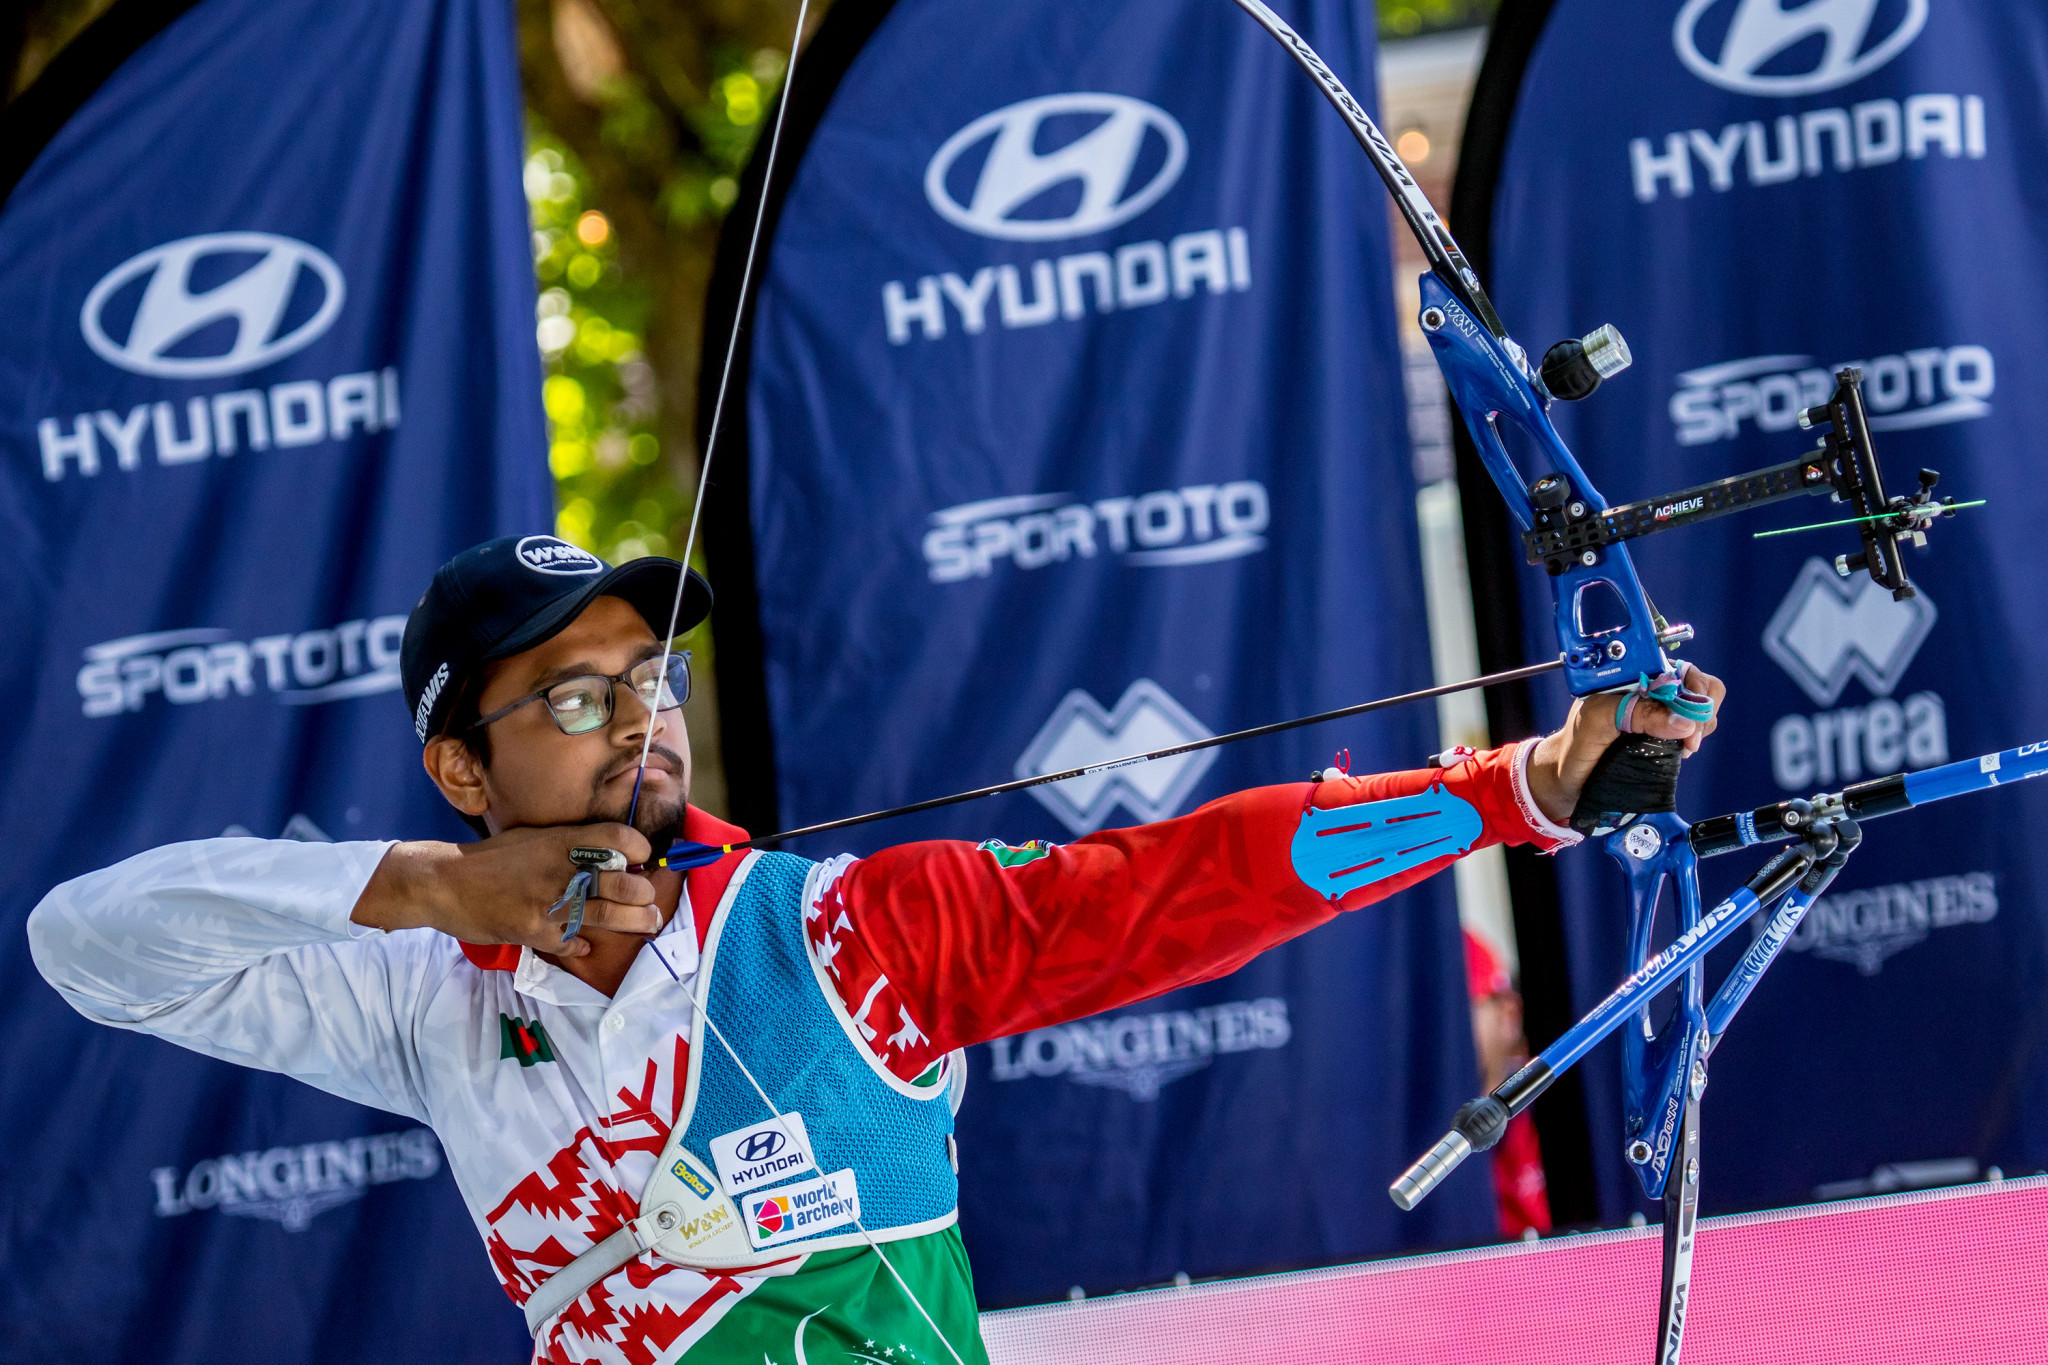 Second stage of Archery World Cup set to be contested in Lausanne